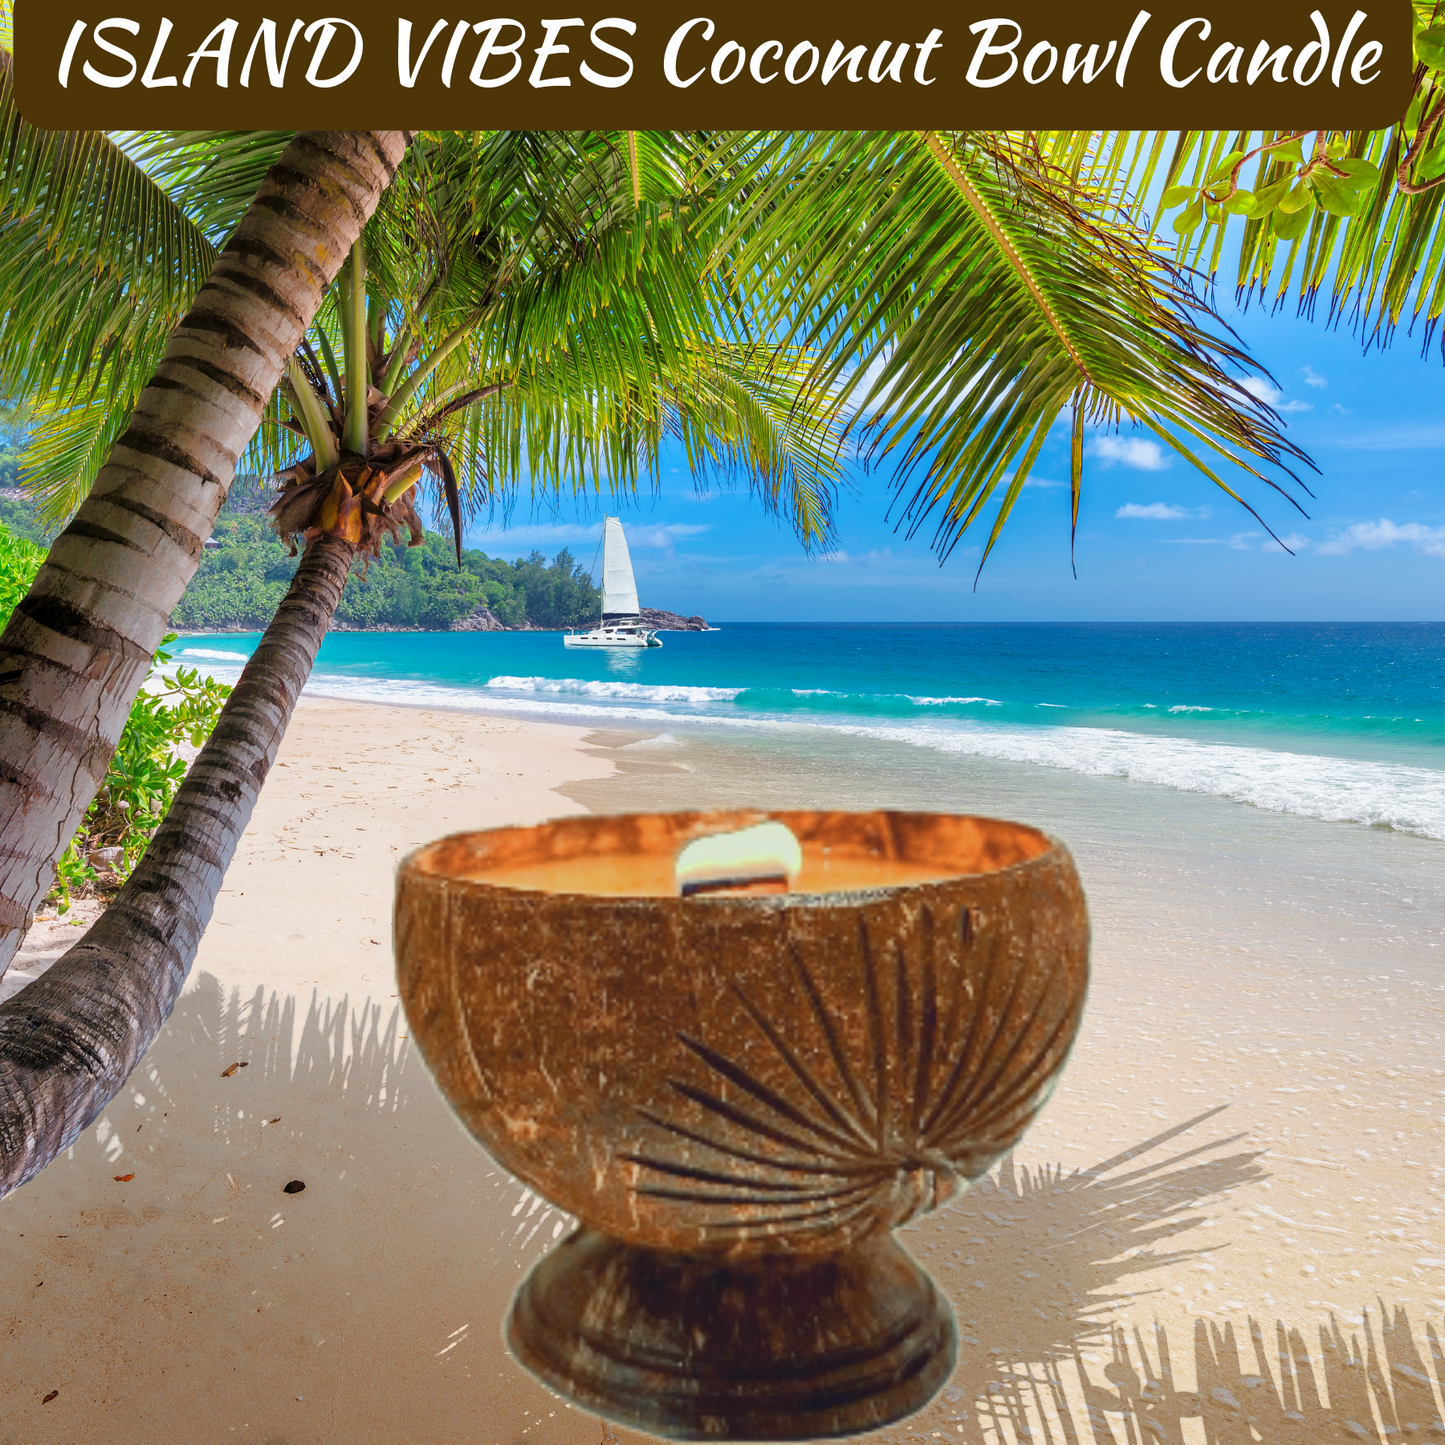 ISLAND VIBES Coconut Bowl Candle